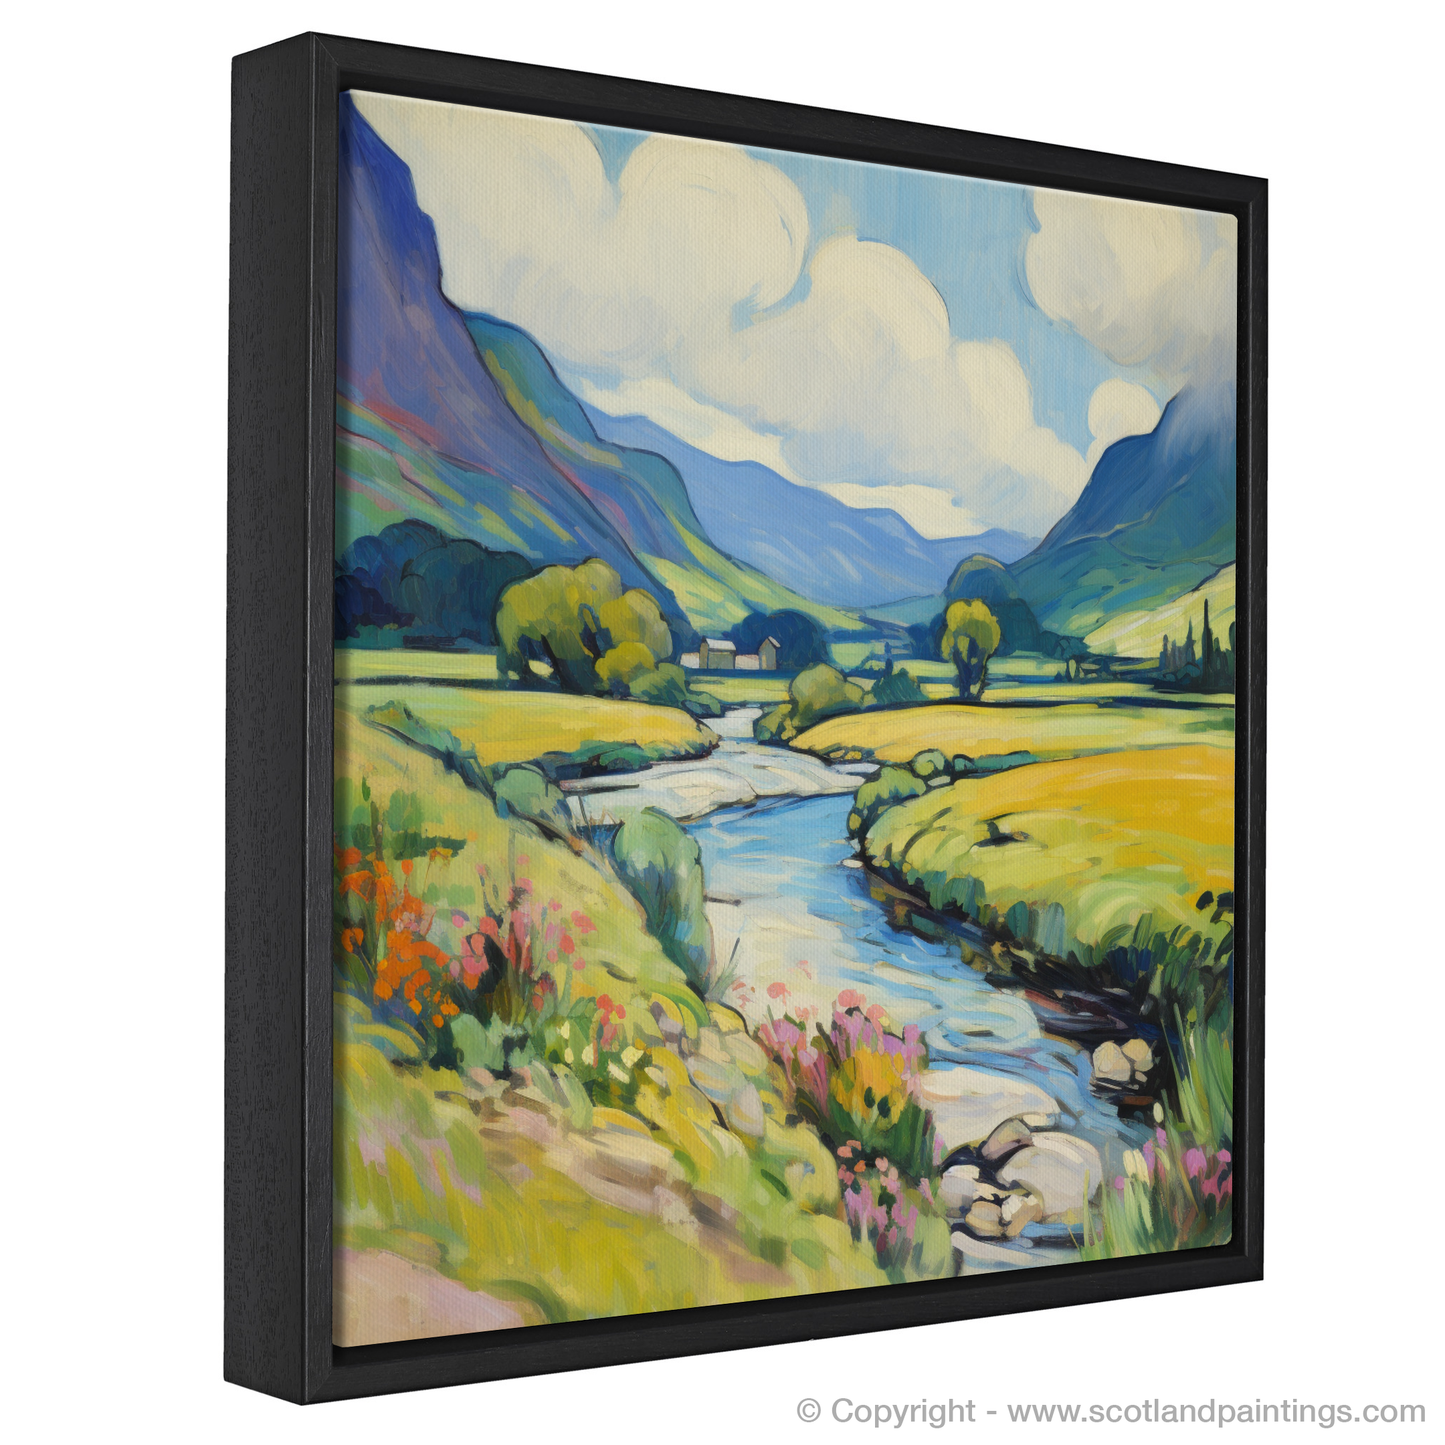 Painting and Art Print of Glen Falloch, Argyll and Bute in summer entitled "Summer Rhapsody in Glen Falloch".